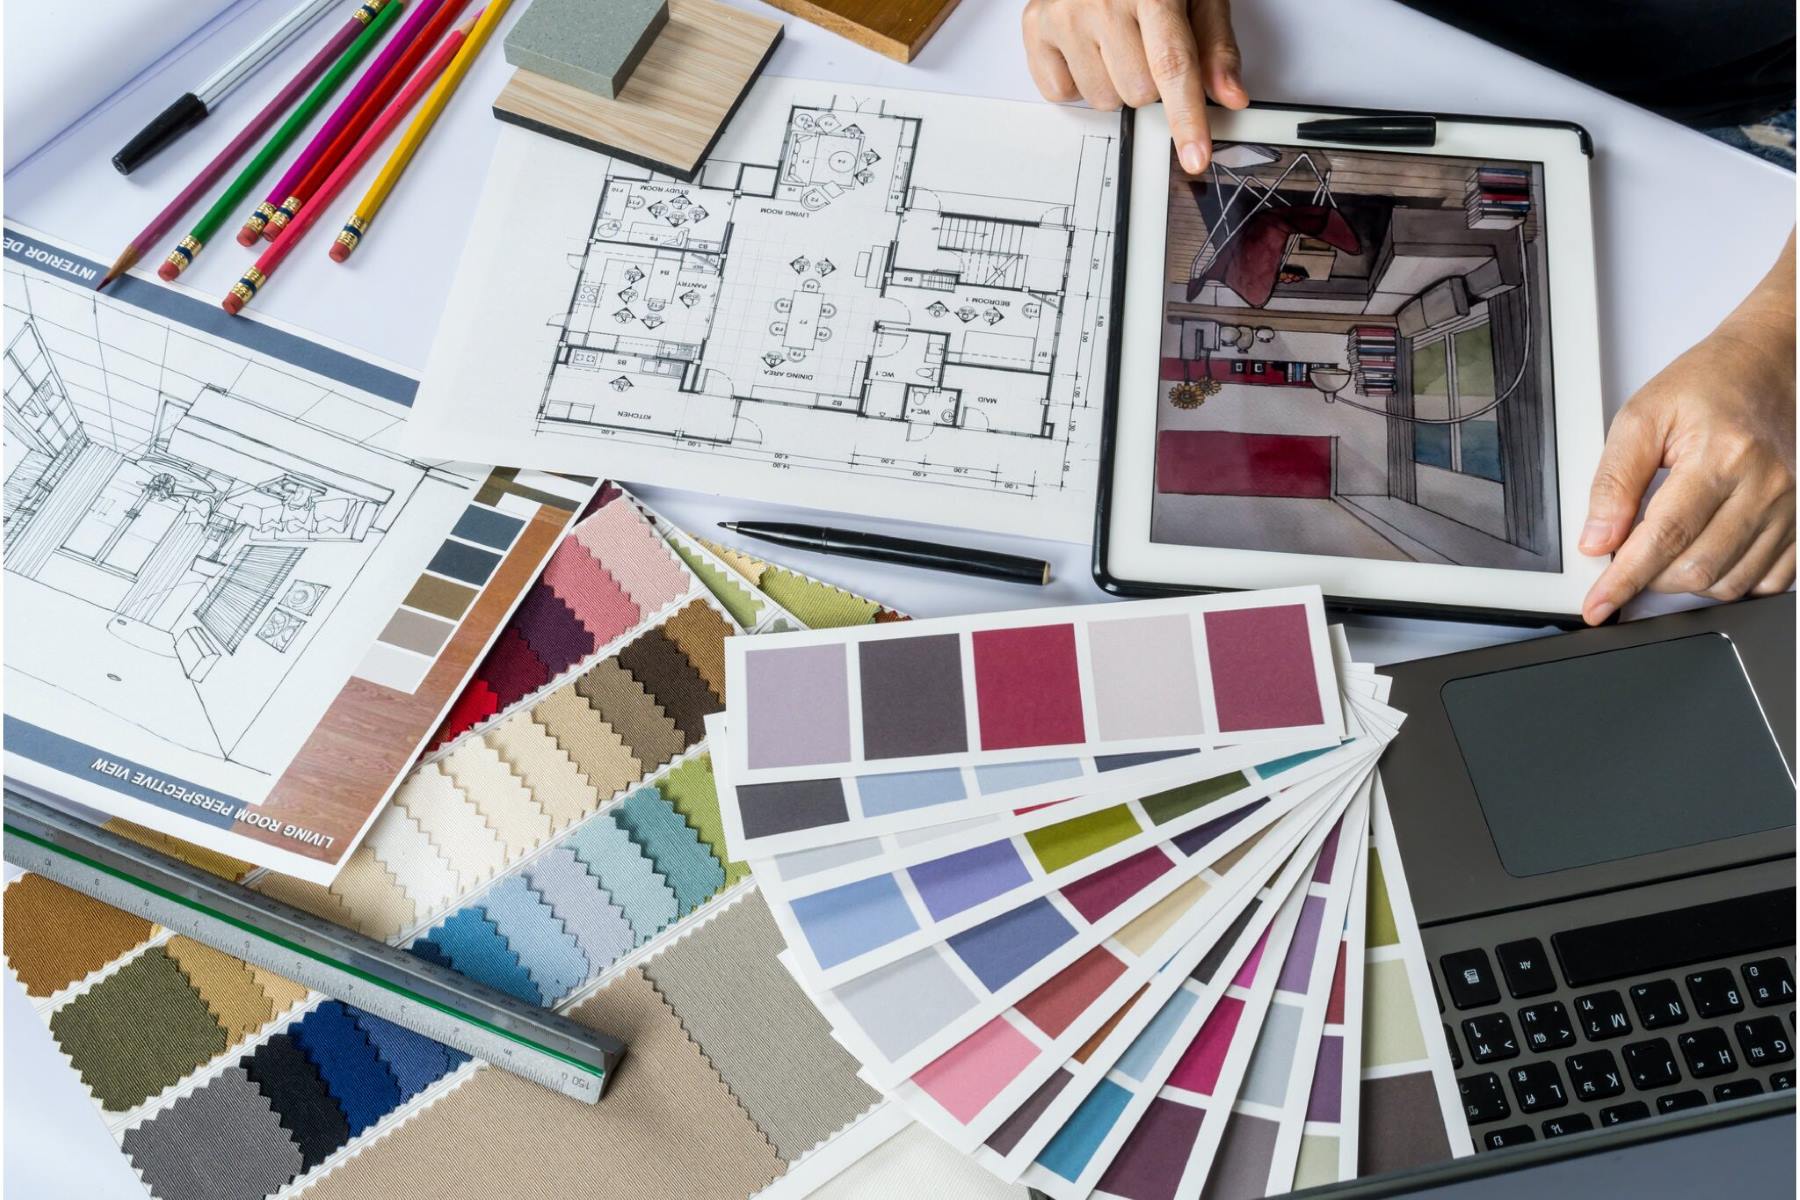 How Many Types Of Design To Decorate A House